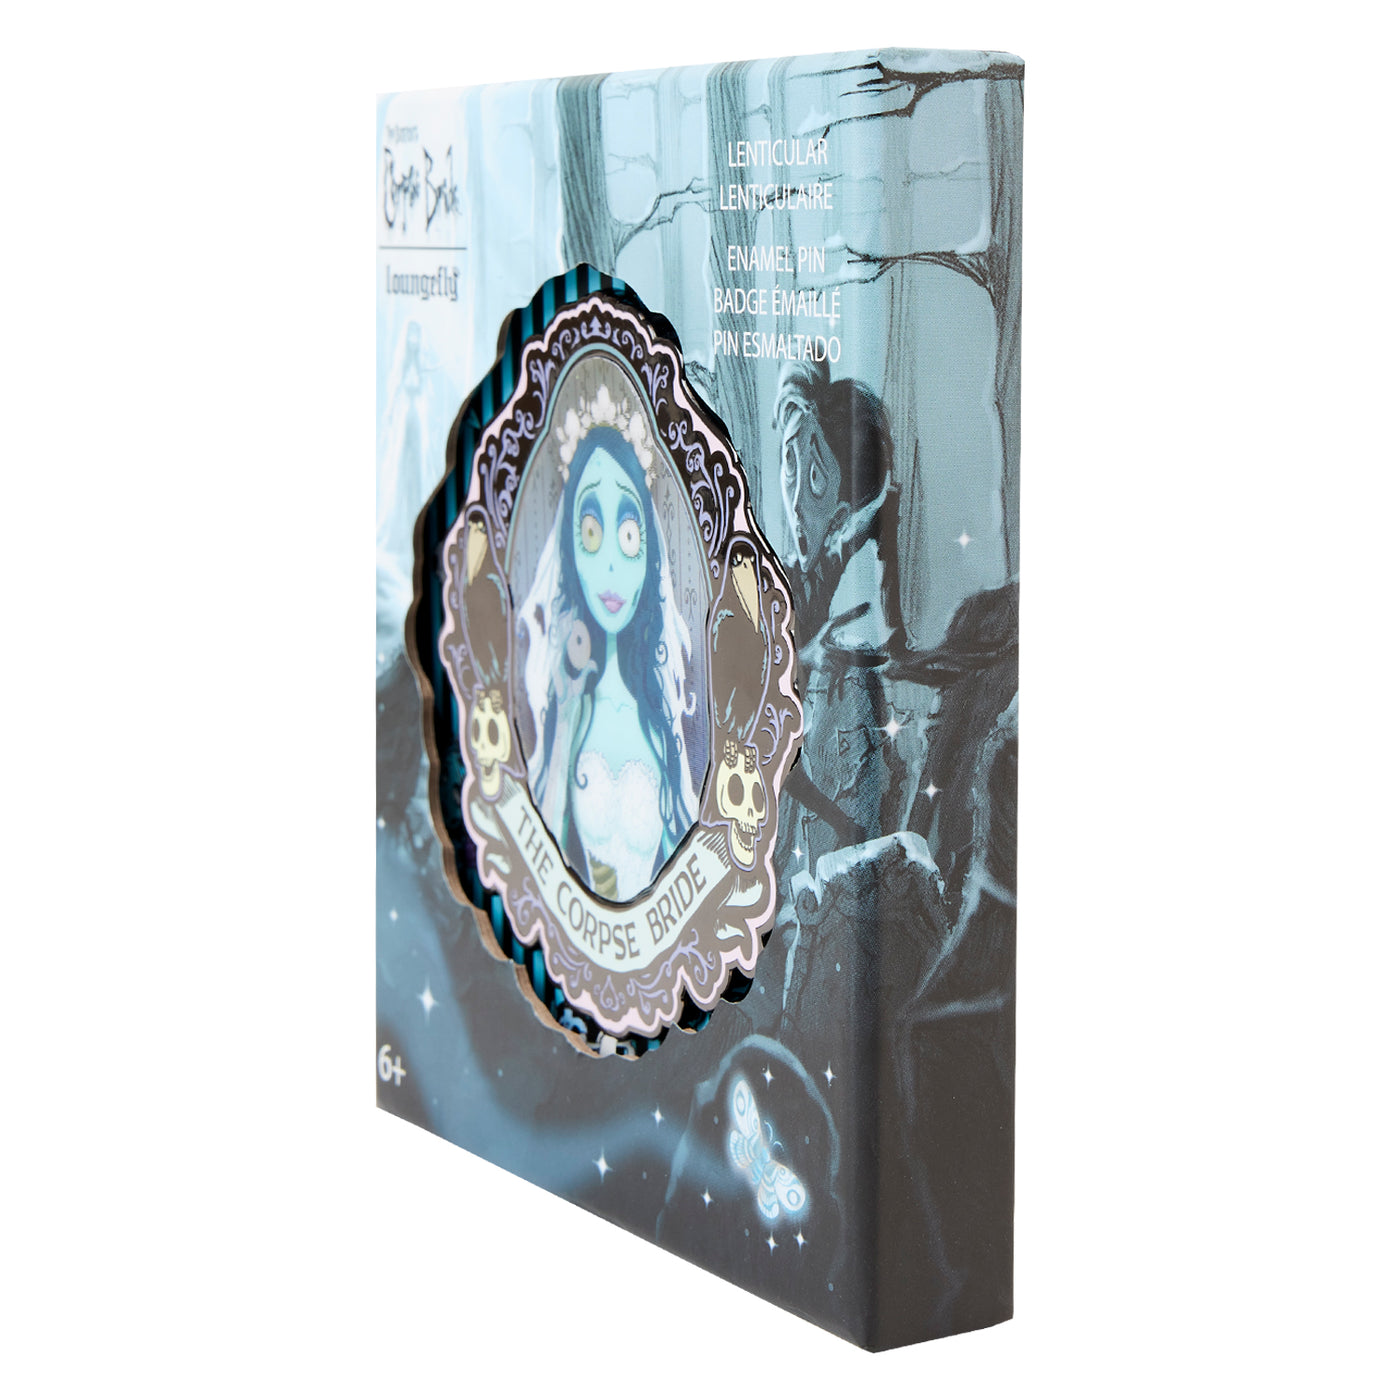 Corpse Bride Emily Lenticular 3" Collector Box Limited Edition Pin